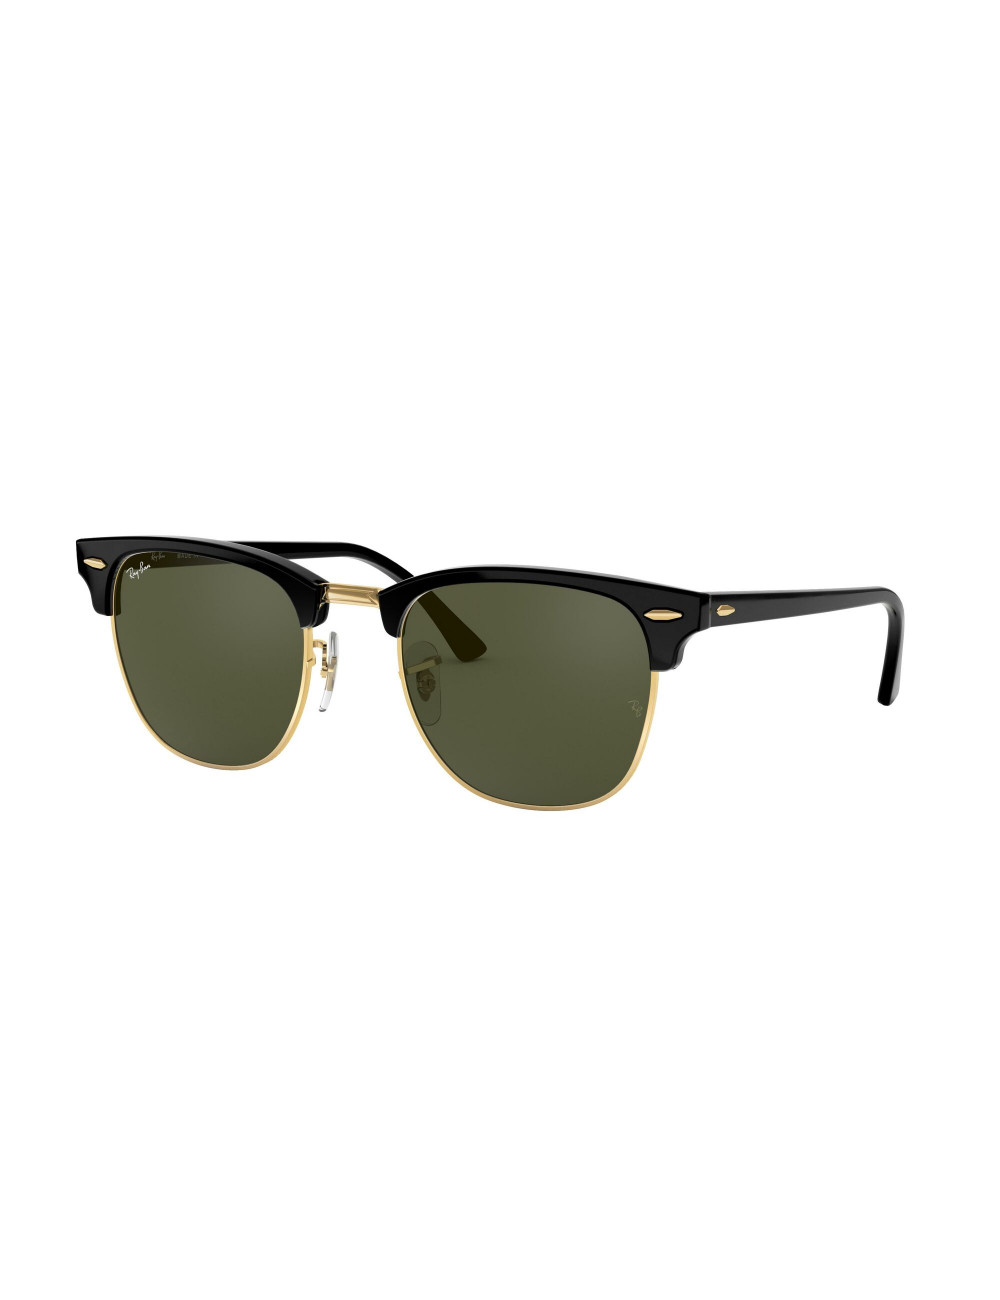 RB3016 Clubmaster Ray Ban W0365